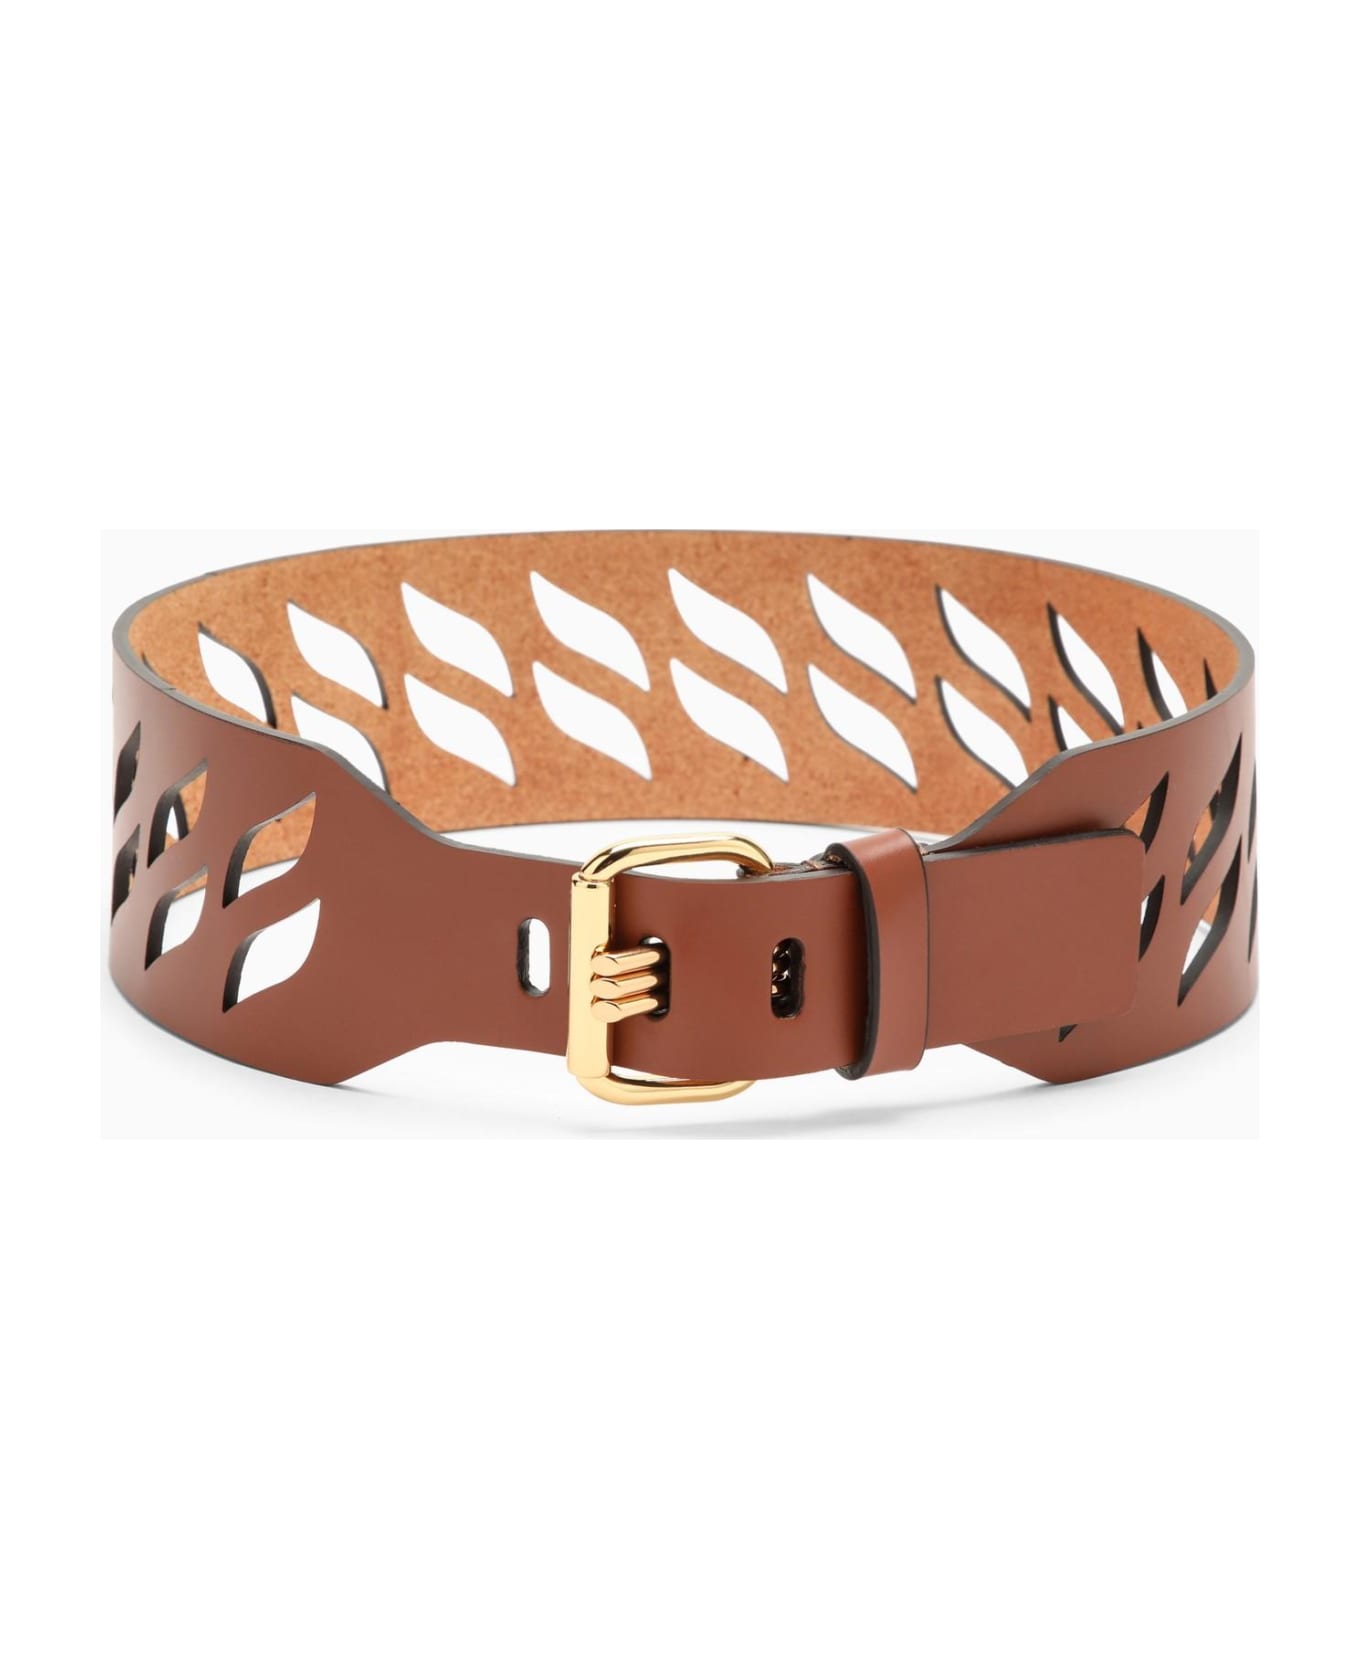 Etro Brown Perforated Leather Belt - Marrone